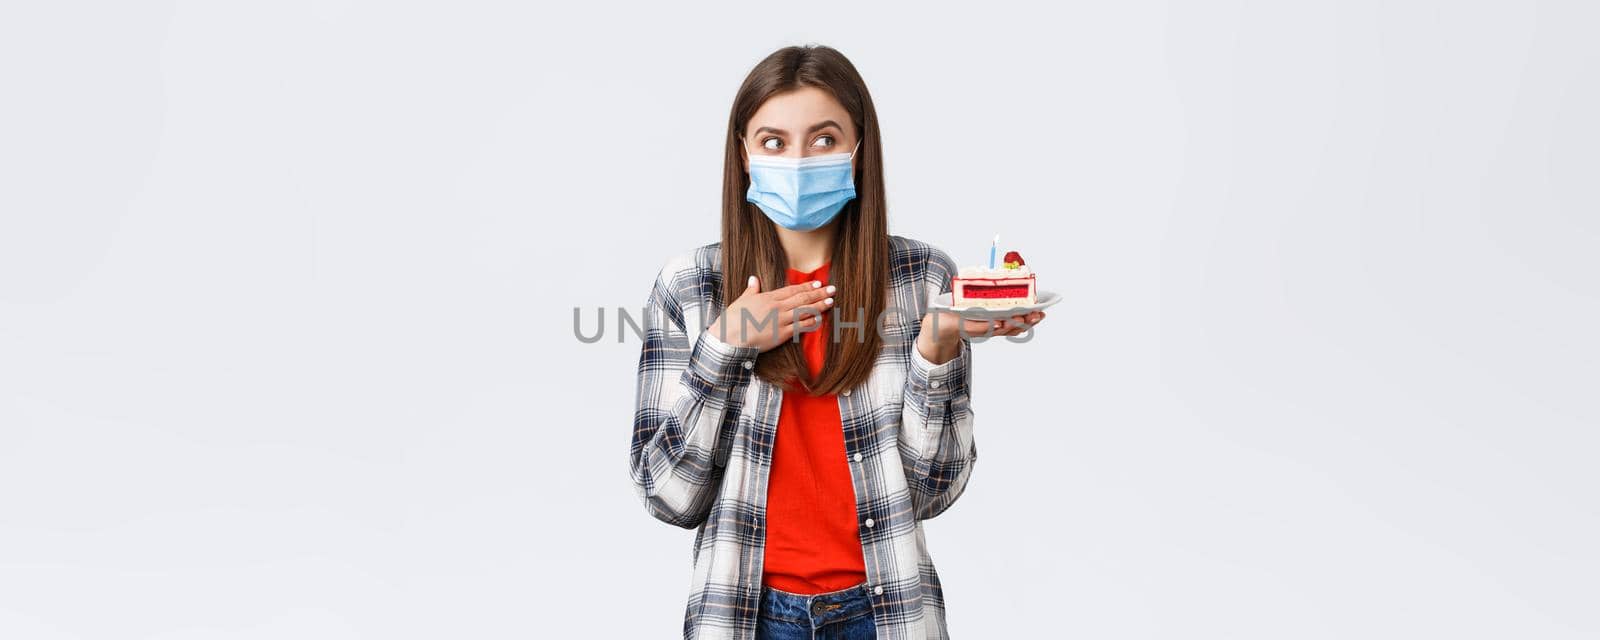 Coronavirus outbreak, lifestyle during social distancing and holidays celebration concept. Dreamy happy young girl in medical mask celebrating birthday, hold b-day cake, think what wish.